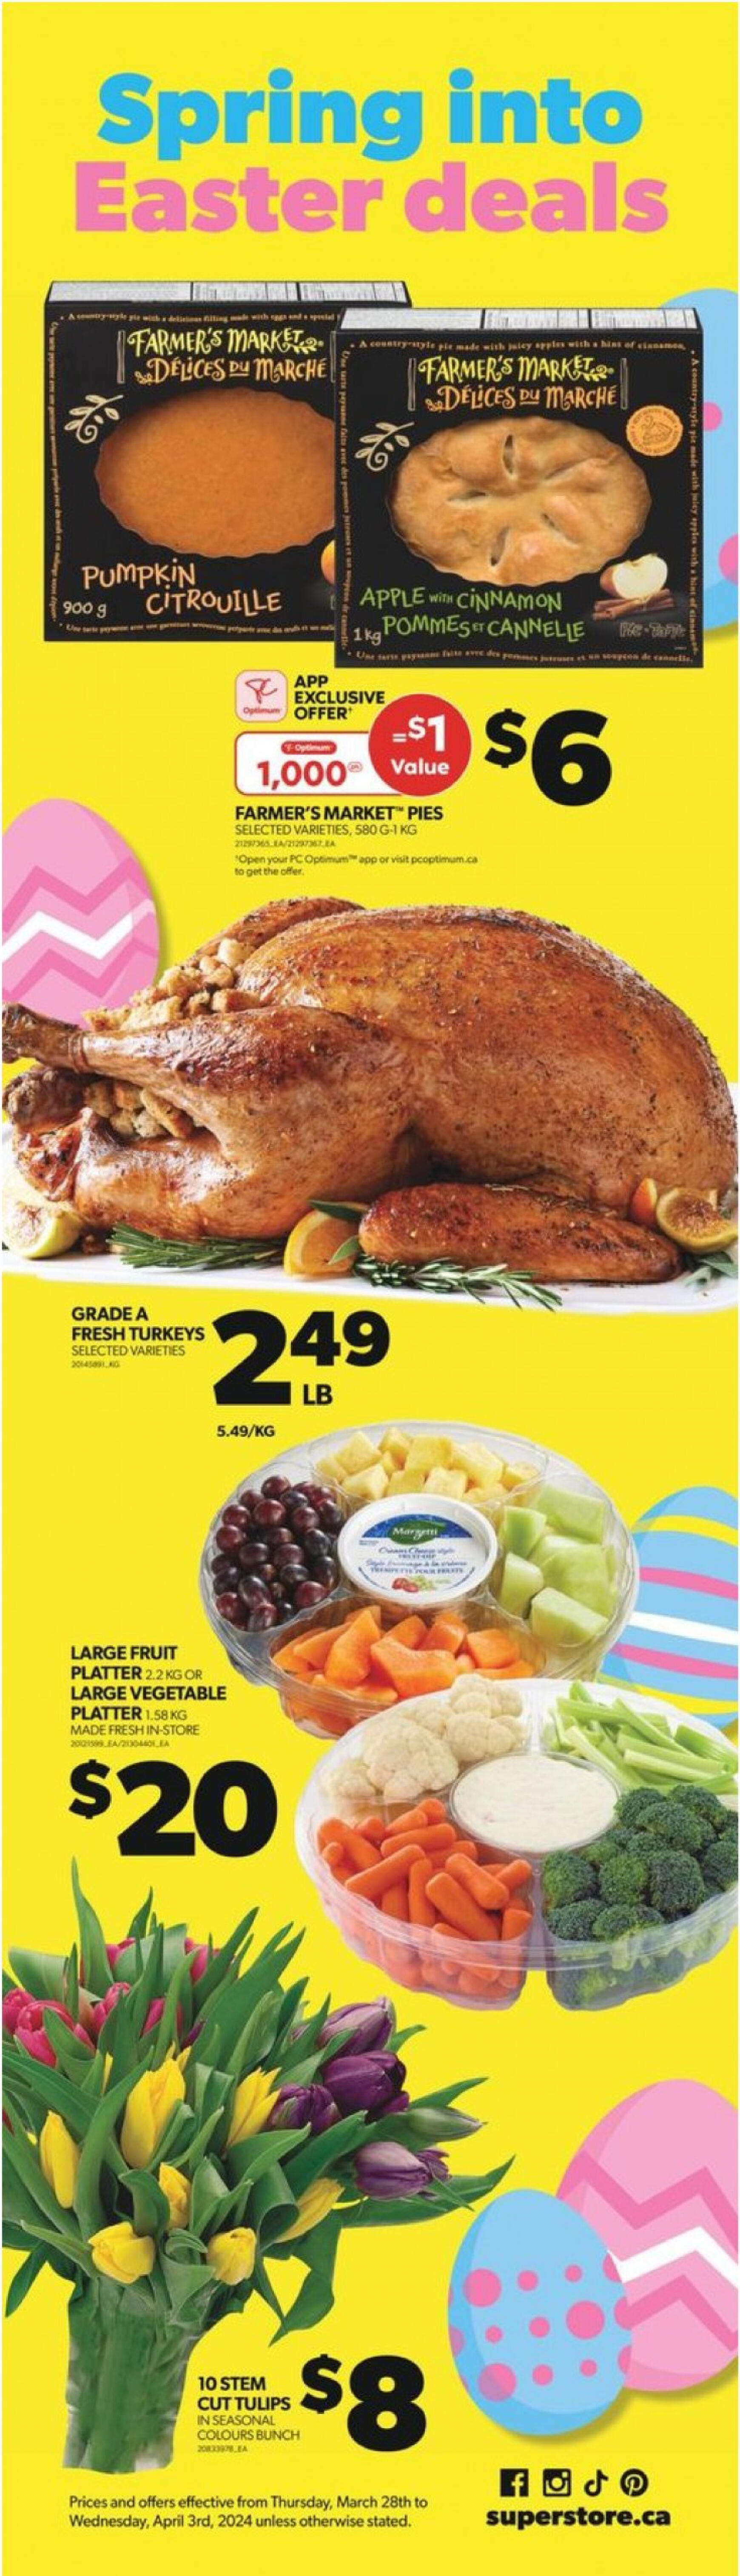 real-canadian-superstore - Real Canadian Superstore flyer current 28.03. - 03.04. - page: 2